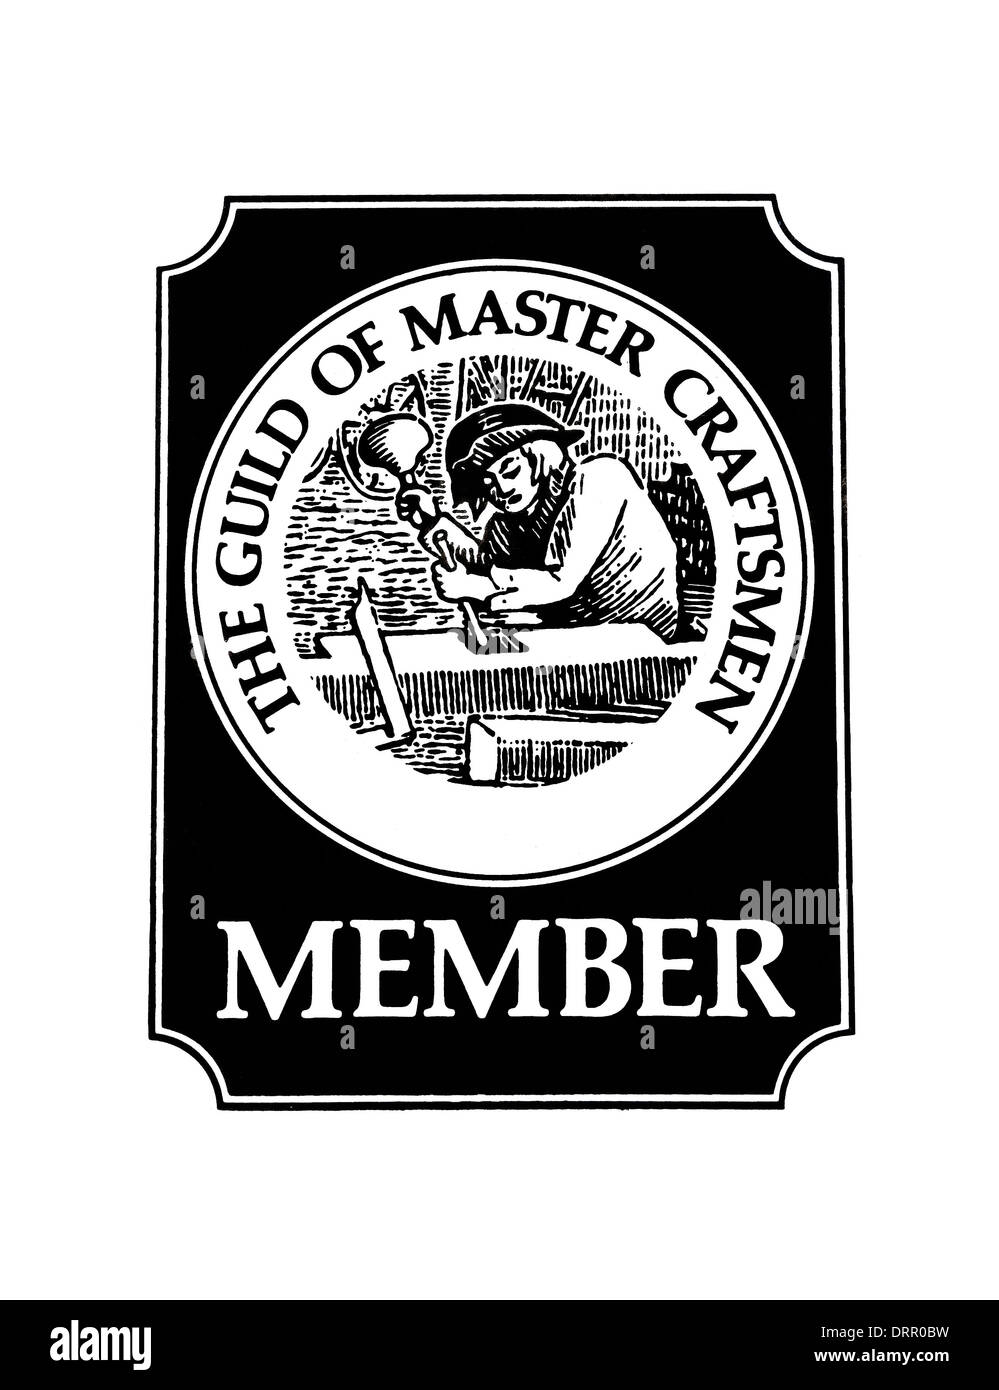 The guild of master craftsman member plaque Stock Photo